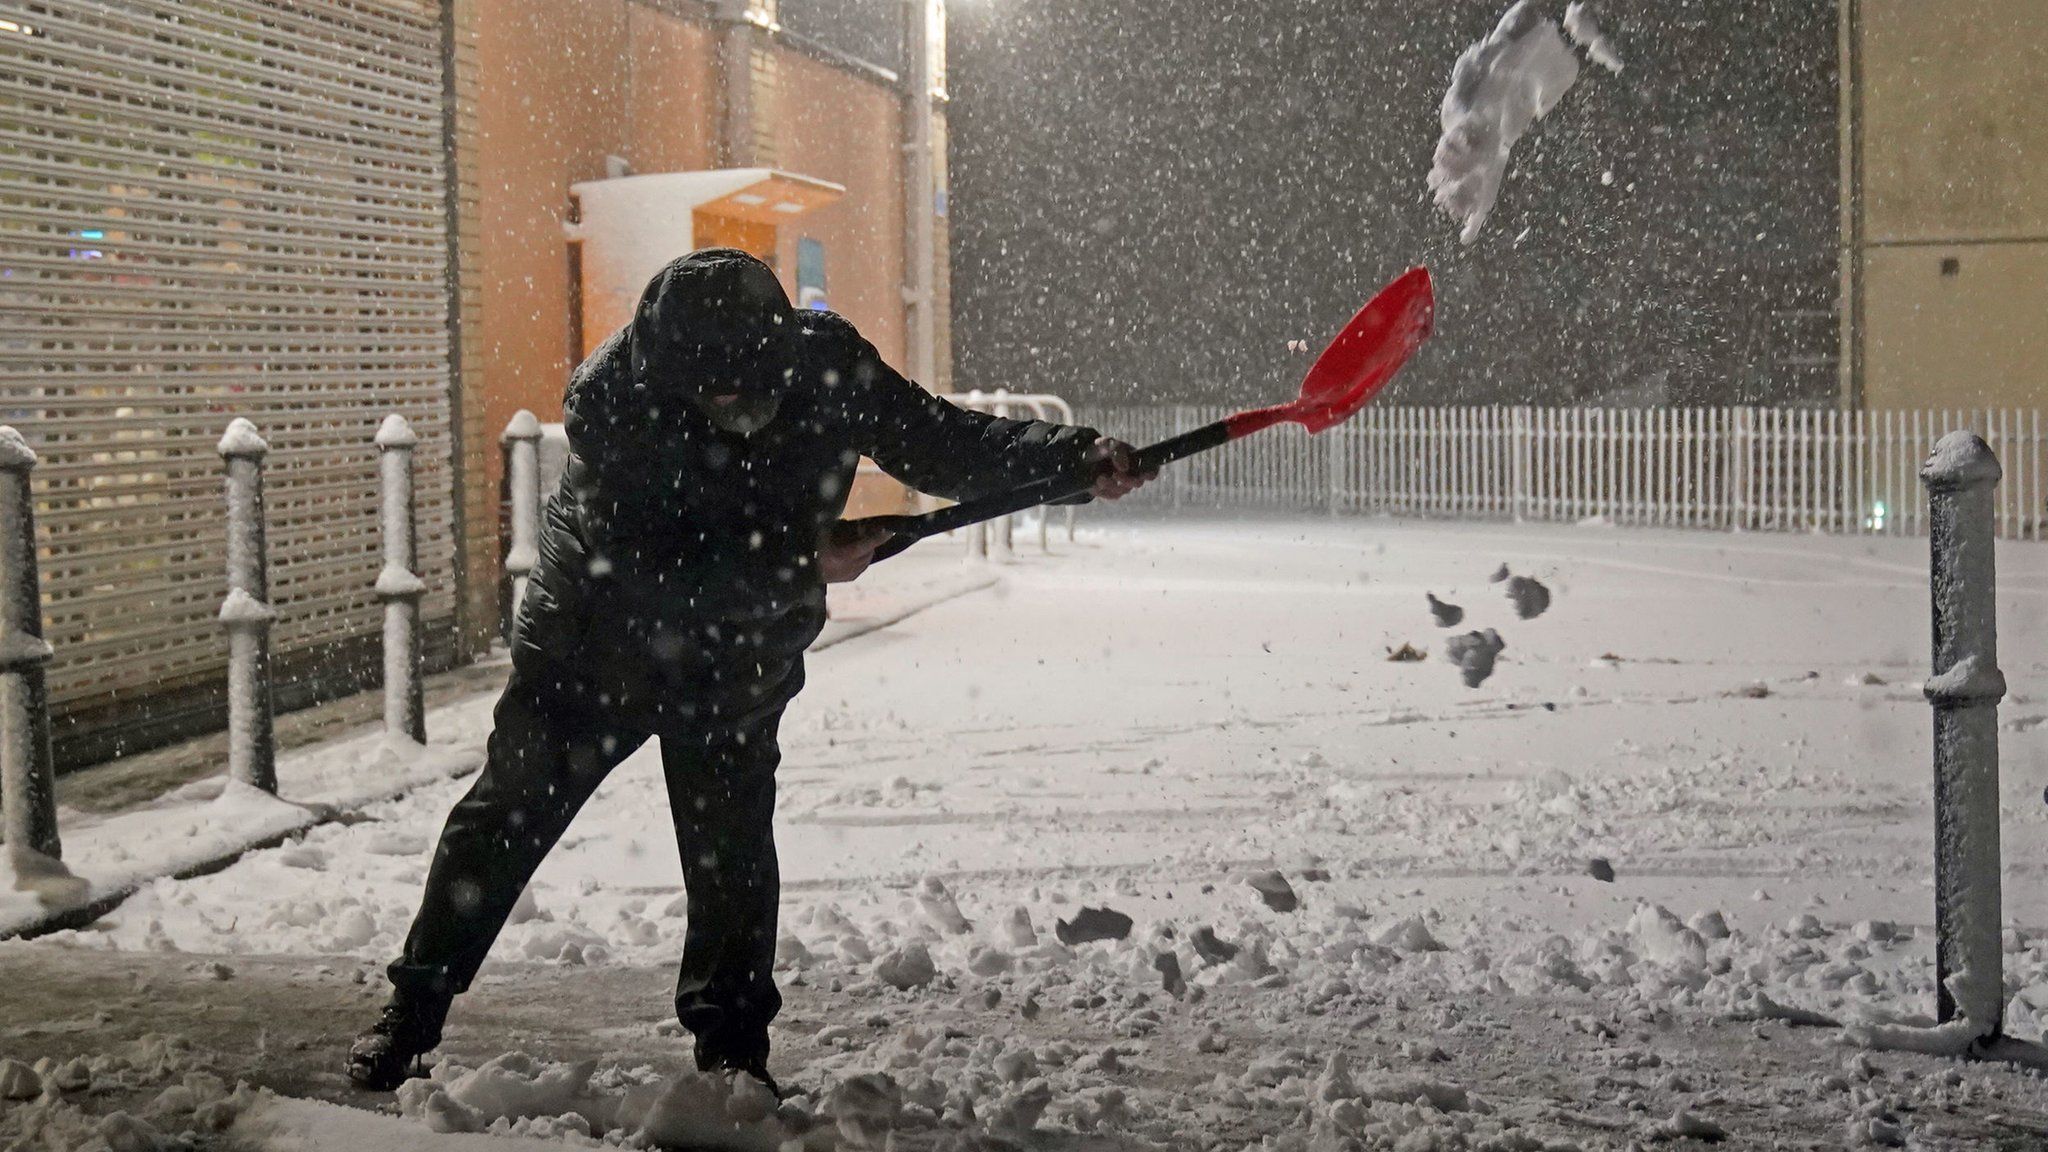 Man clearing snow